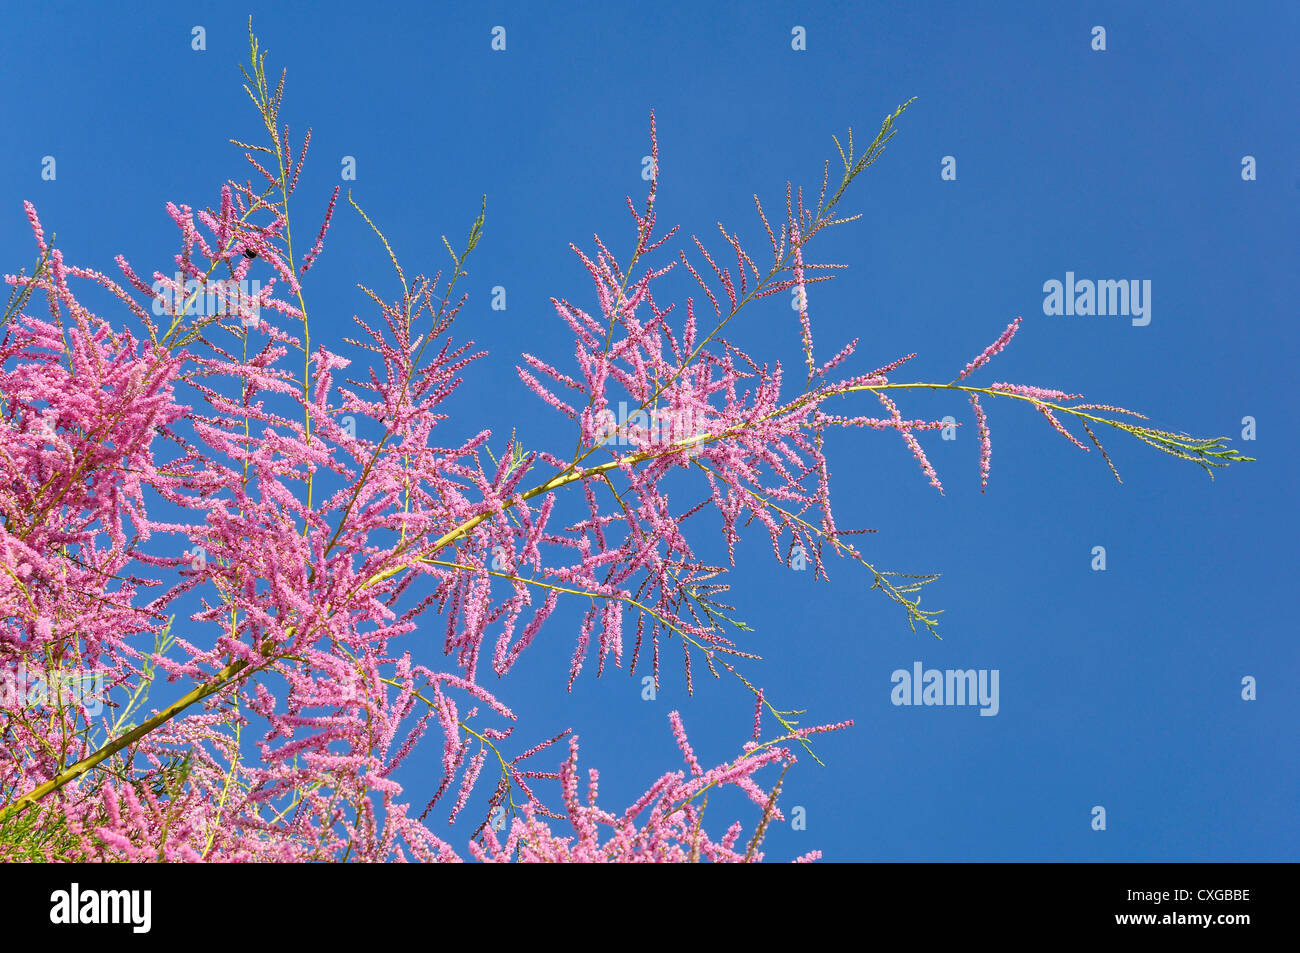 Flowering on branches of a tamarisk tree on blue sky background Stock Photo